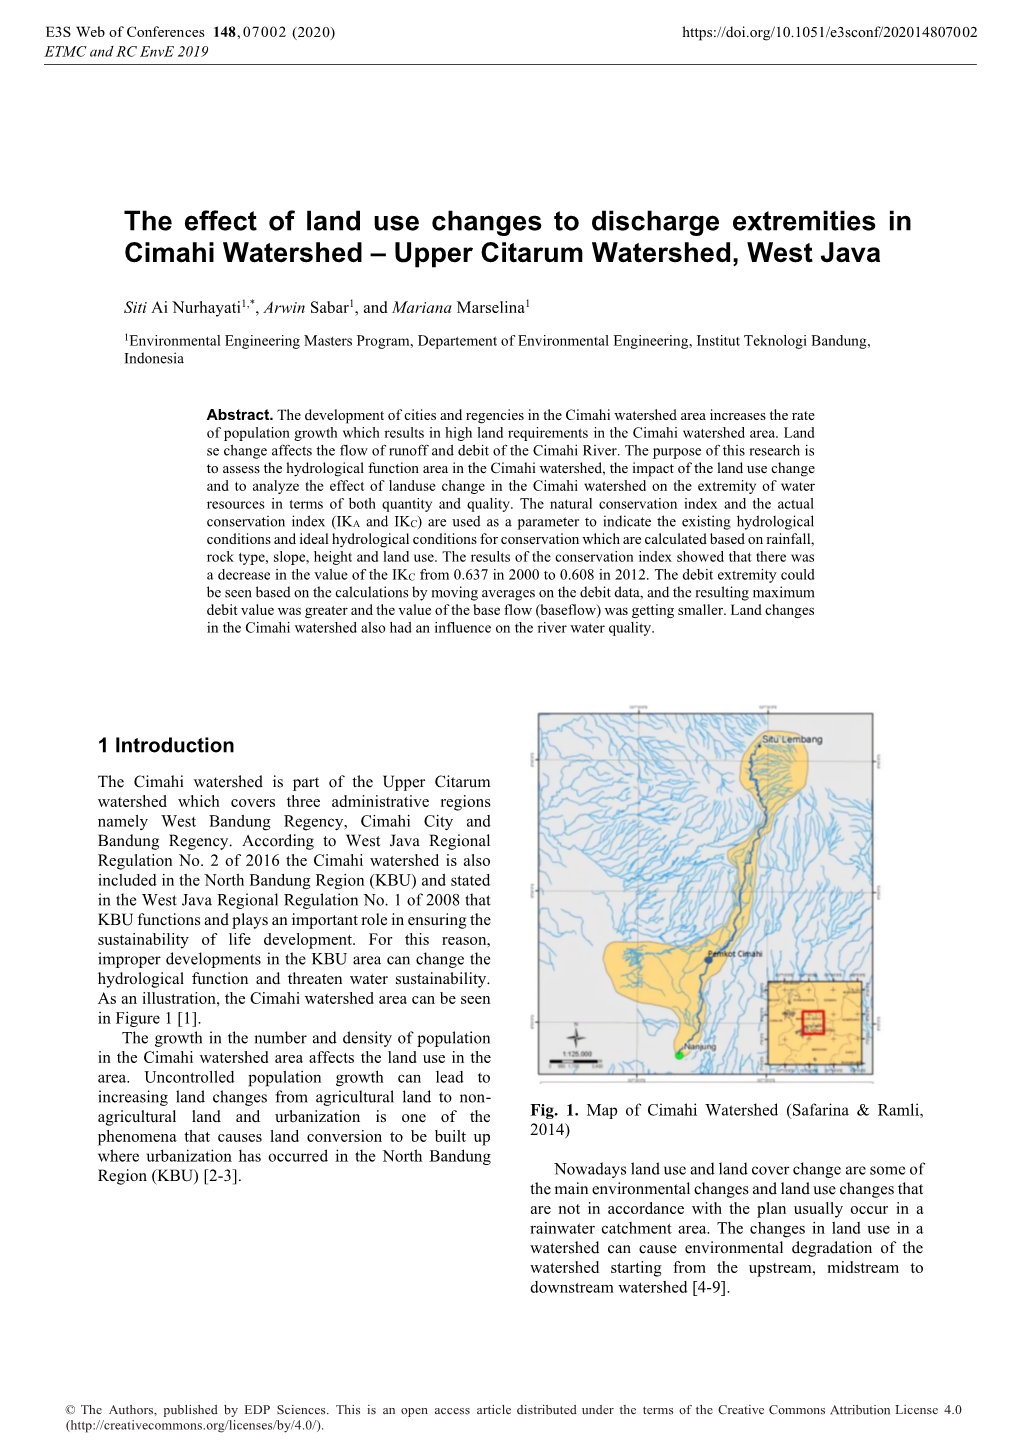 The Effect of Land Use Changes to Discharge Extremities in Cimahi Watershed – Upper Citarum Watershed, West Java